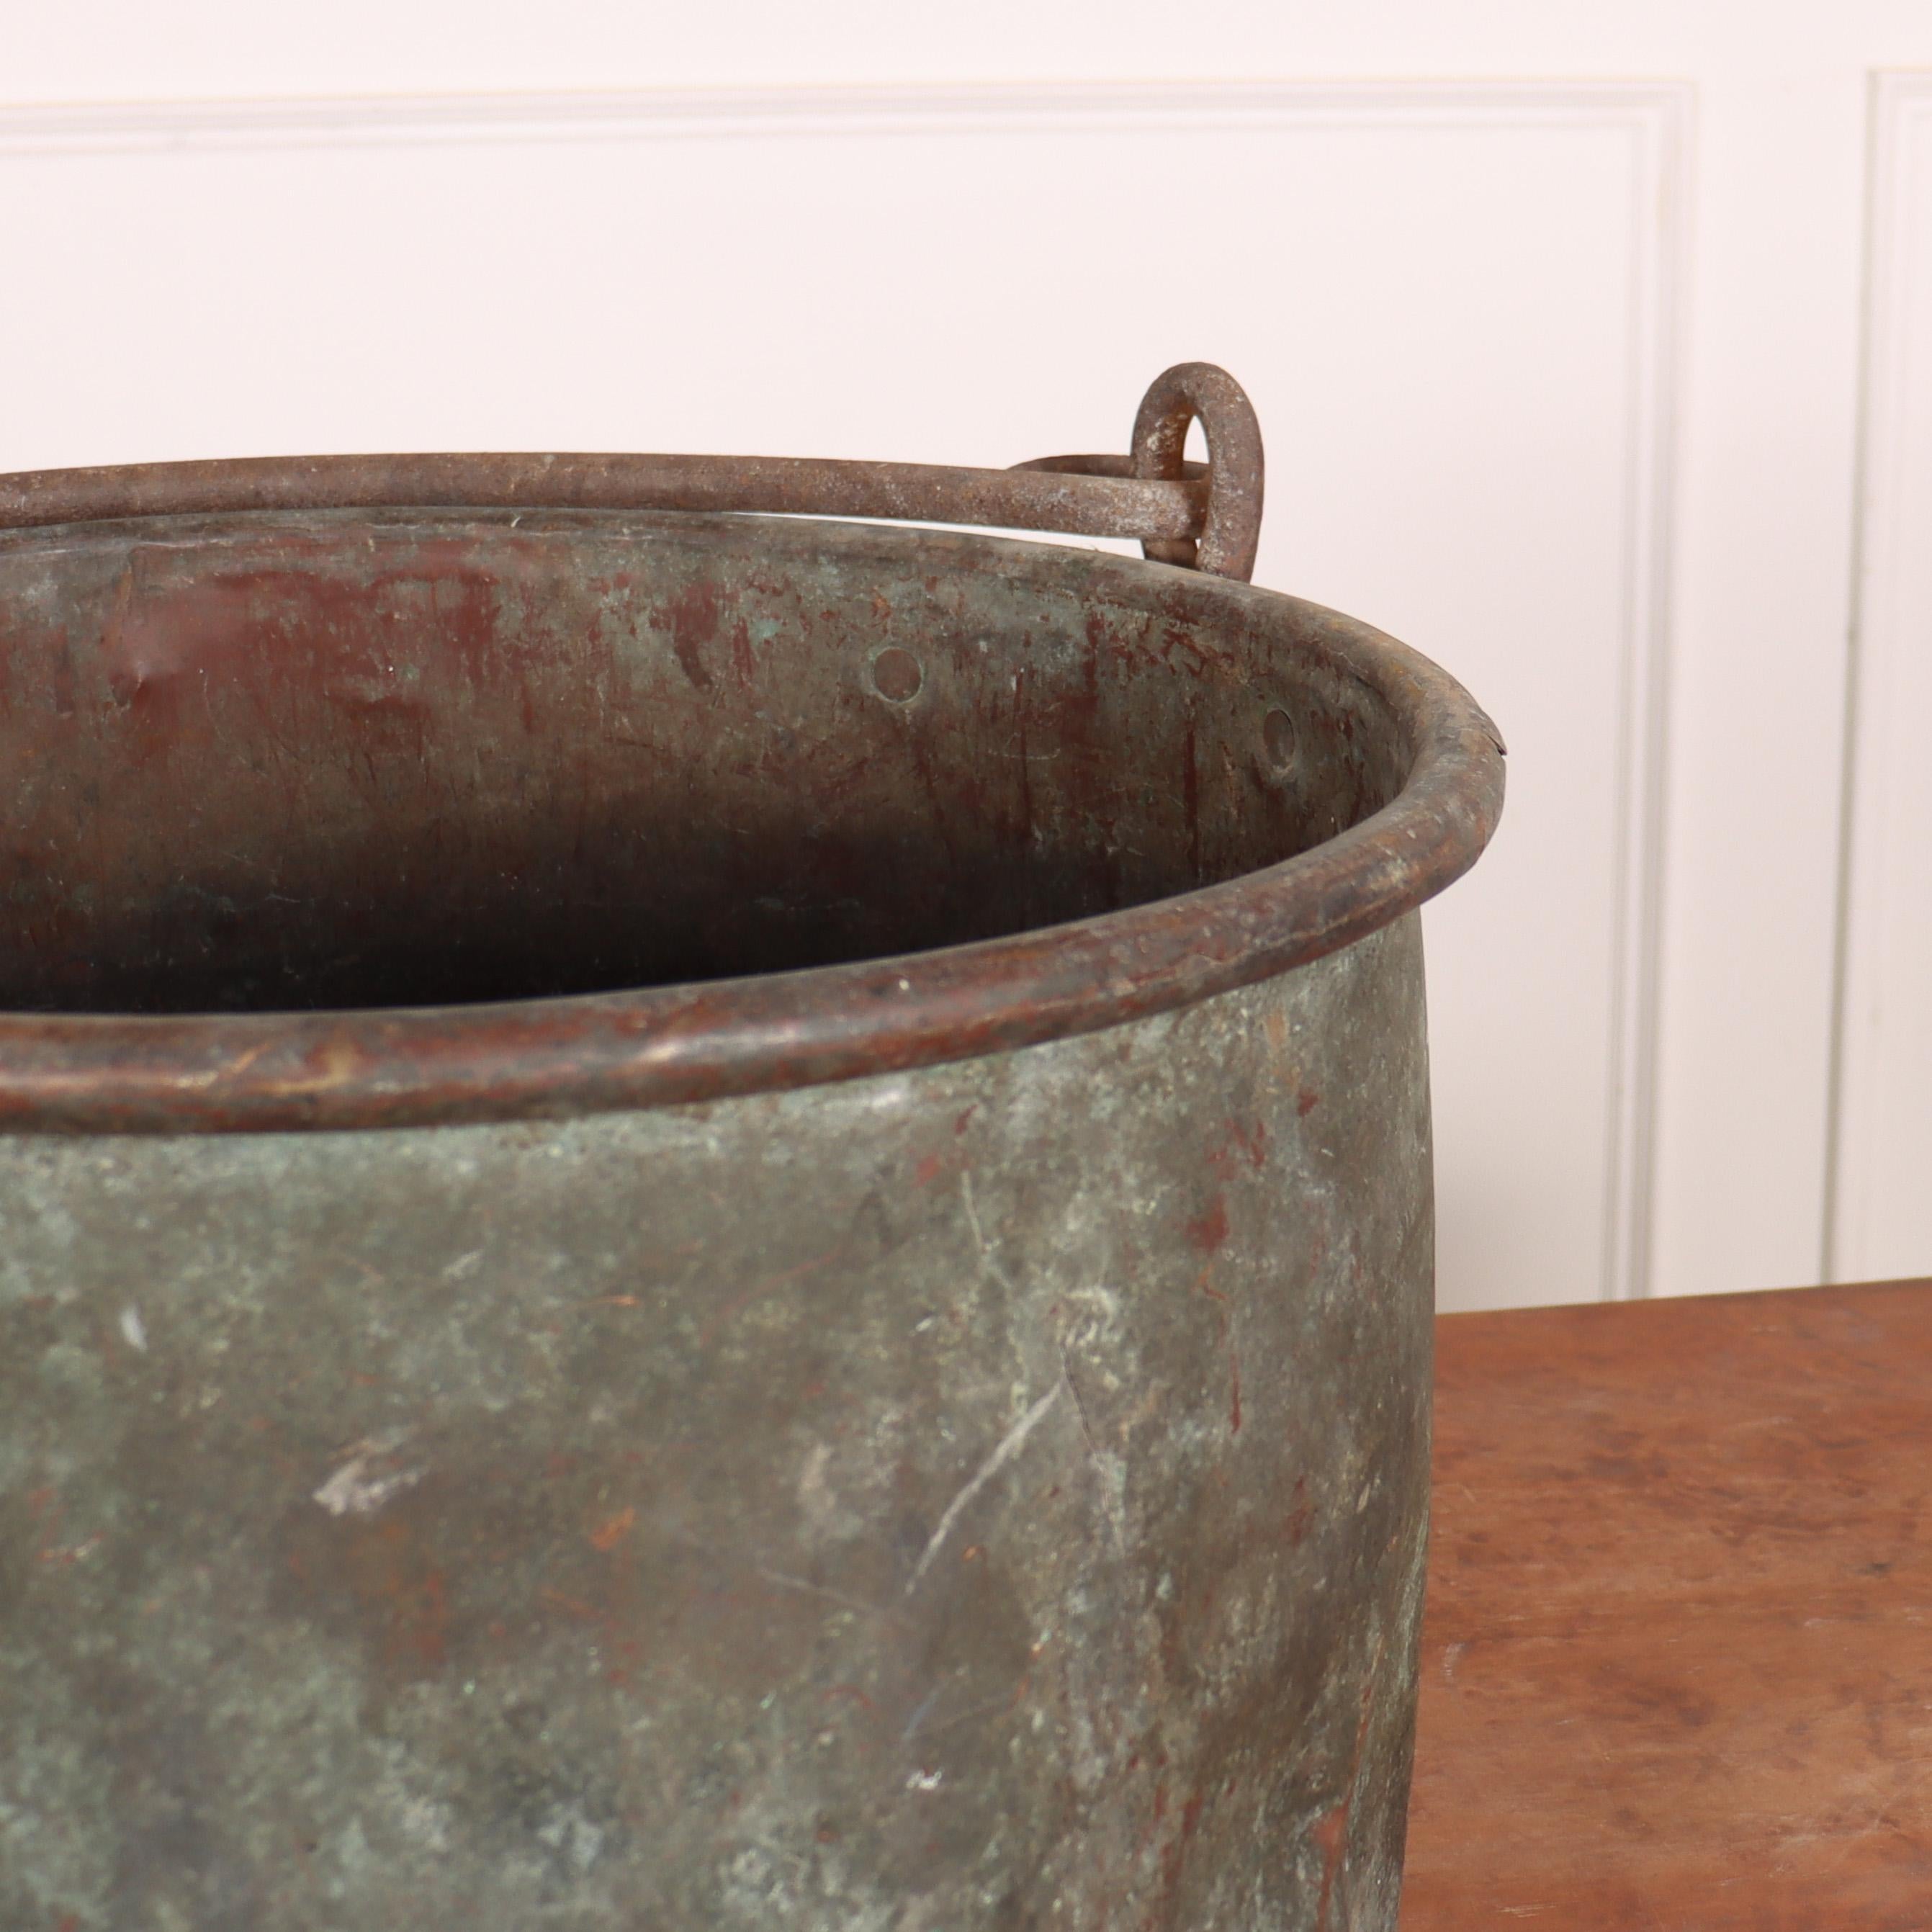 19th C French copper vat with wonderful verdigris patina.

Reference: 7989

Dimensions
13.5 inches (34 cms) High
21 inches (53 cms) Diameter